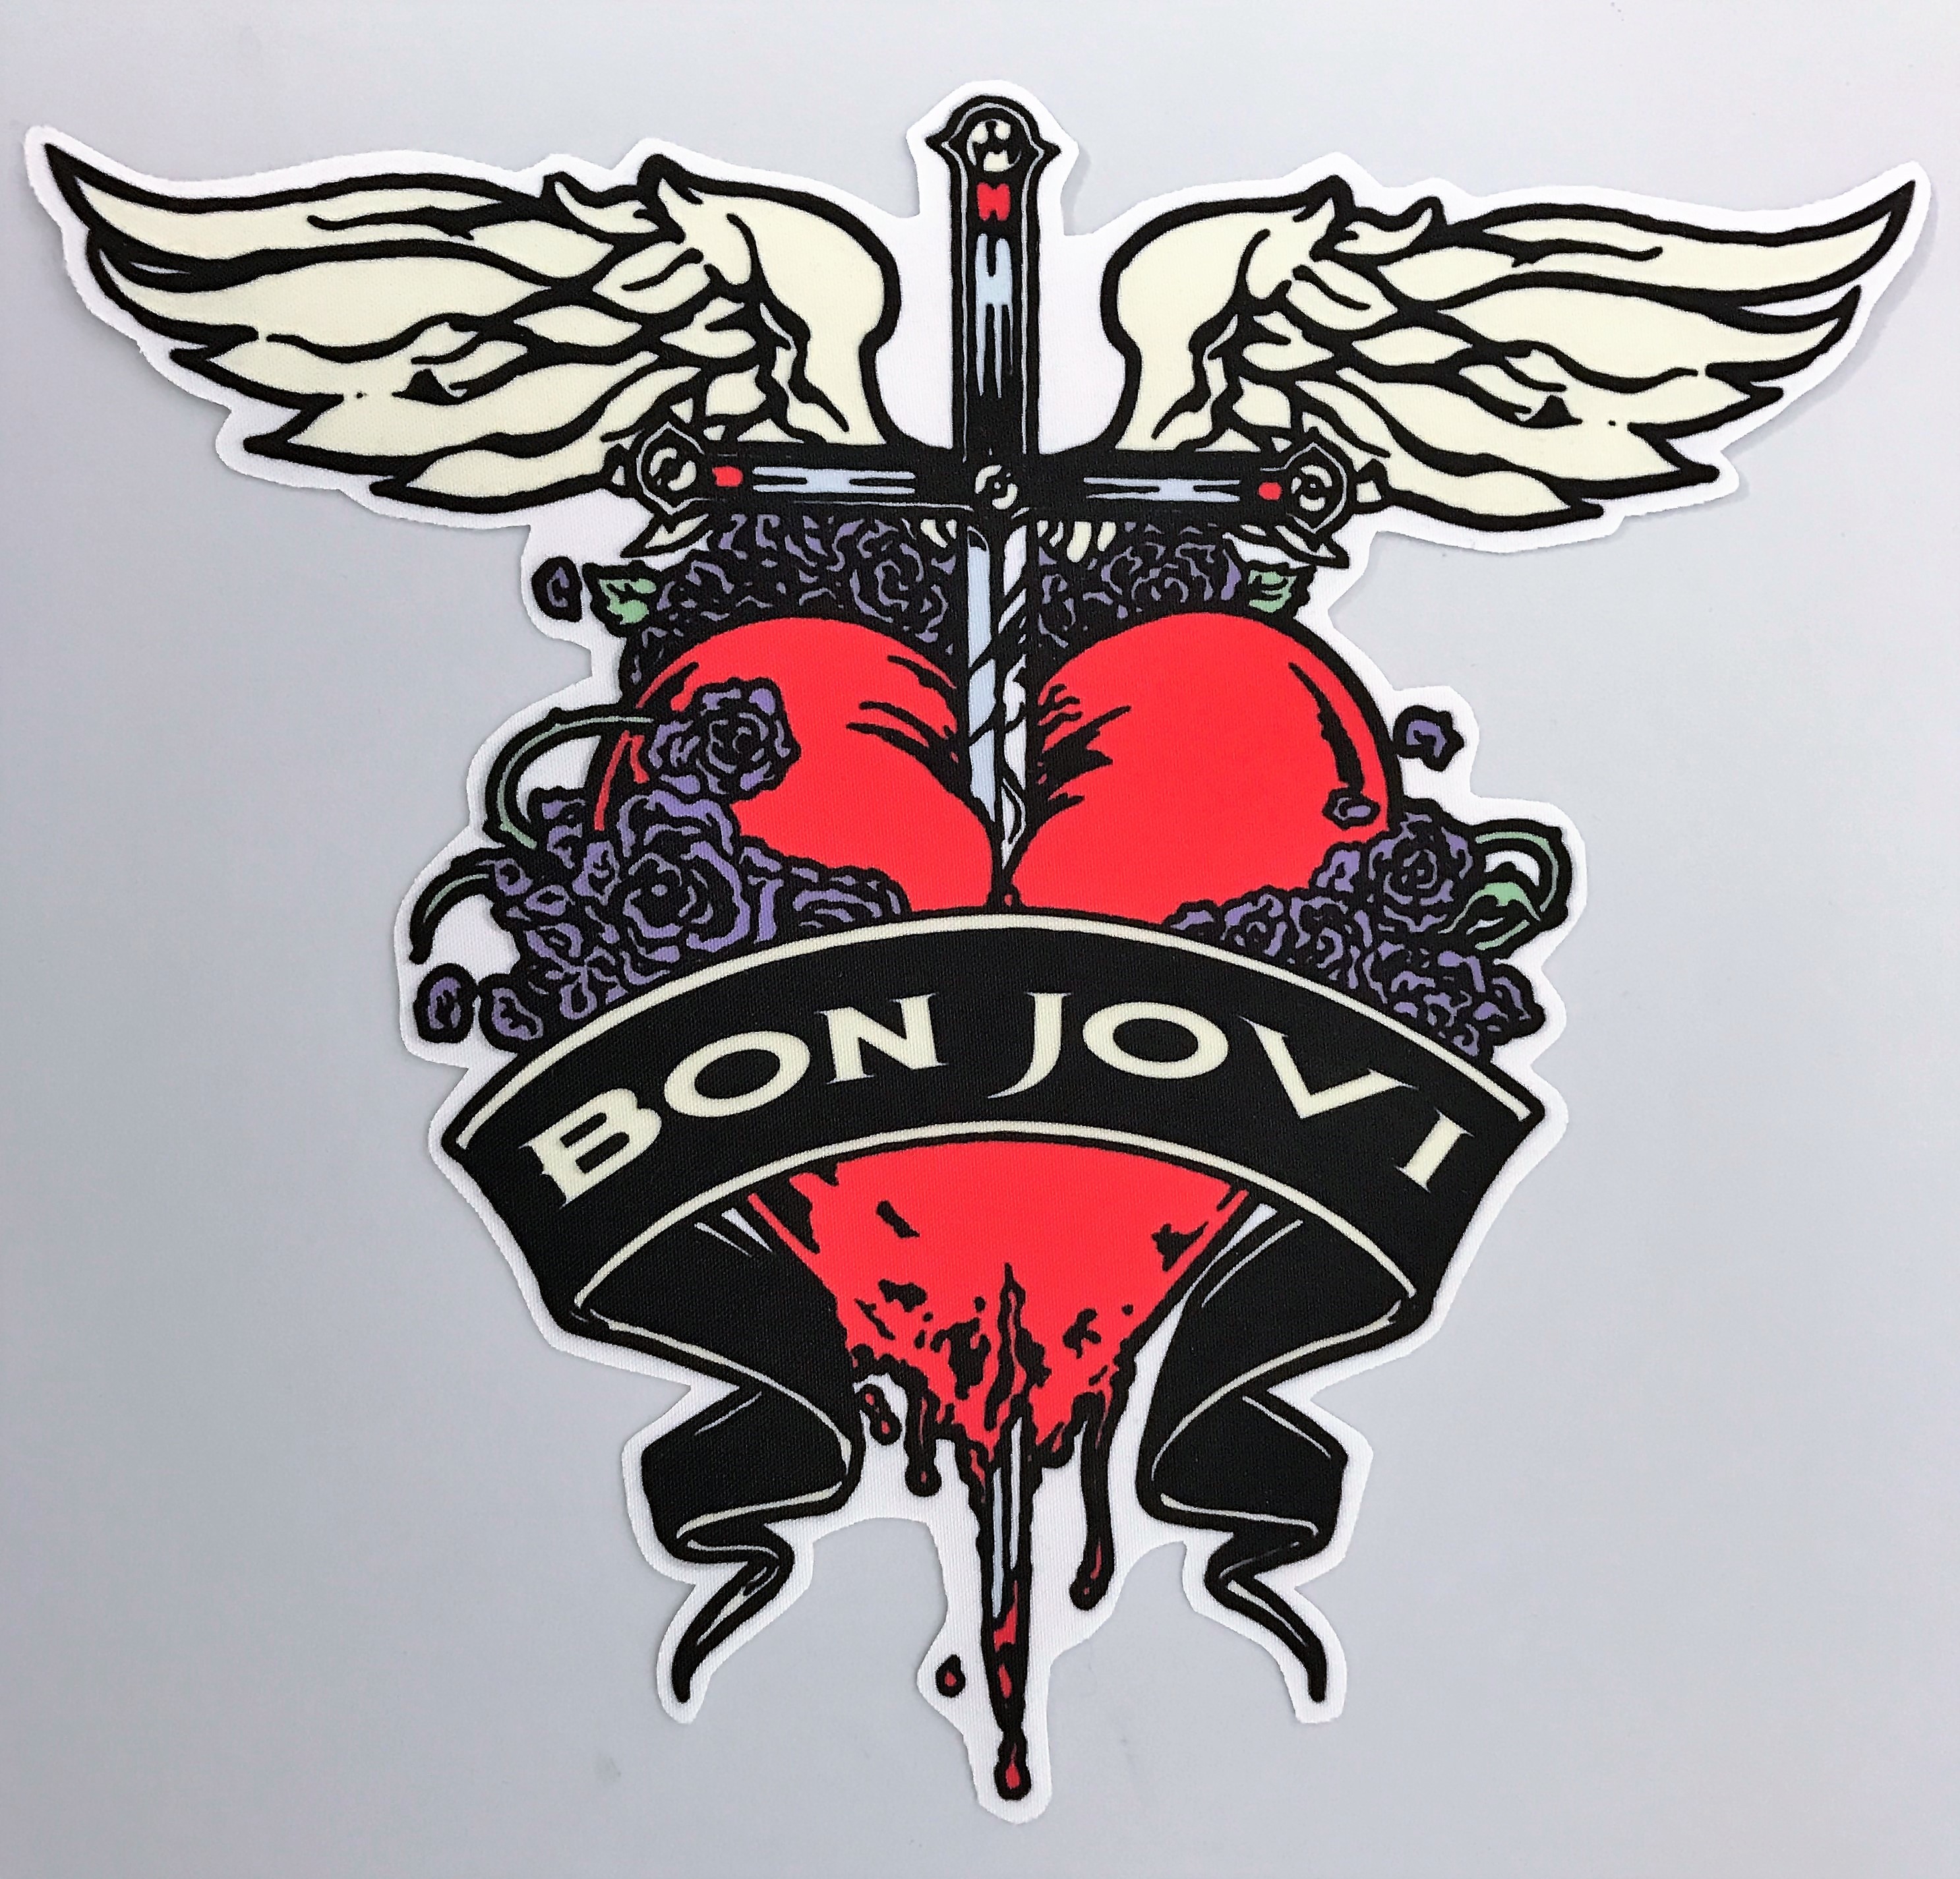 Bon Jovi Patch Music Band Embroidered Iron On Sew On Patch Badge For Clothes etc